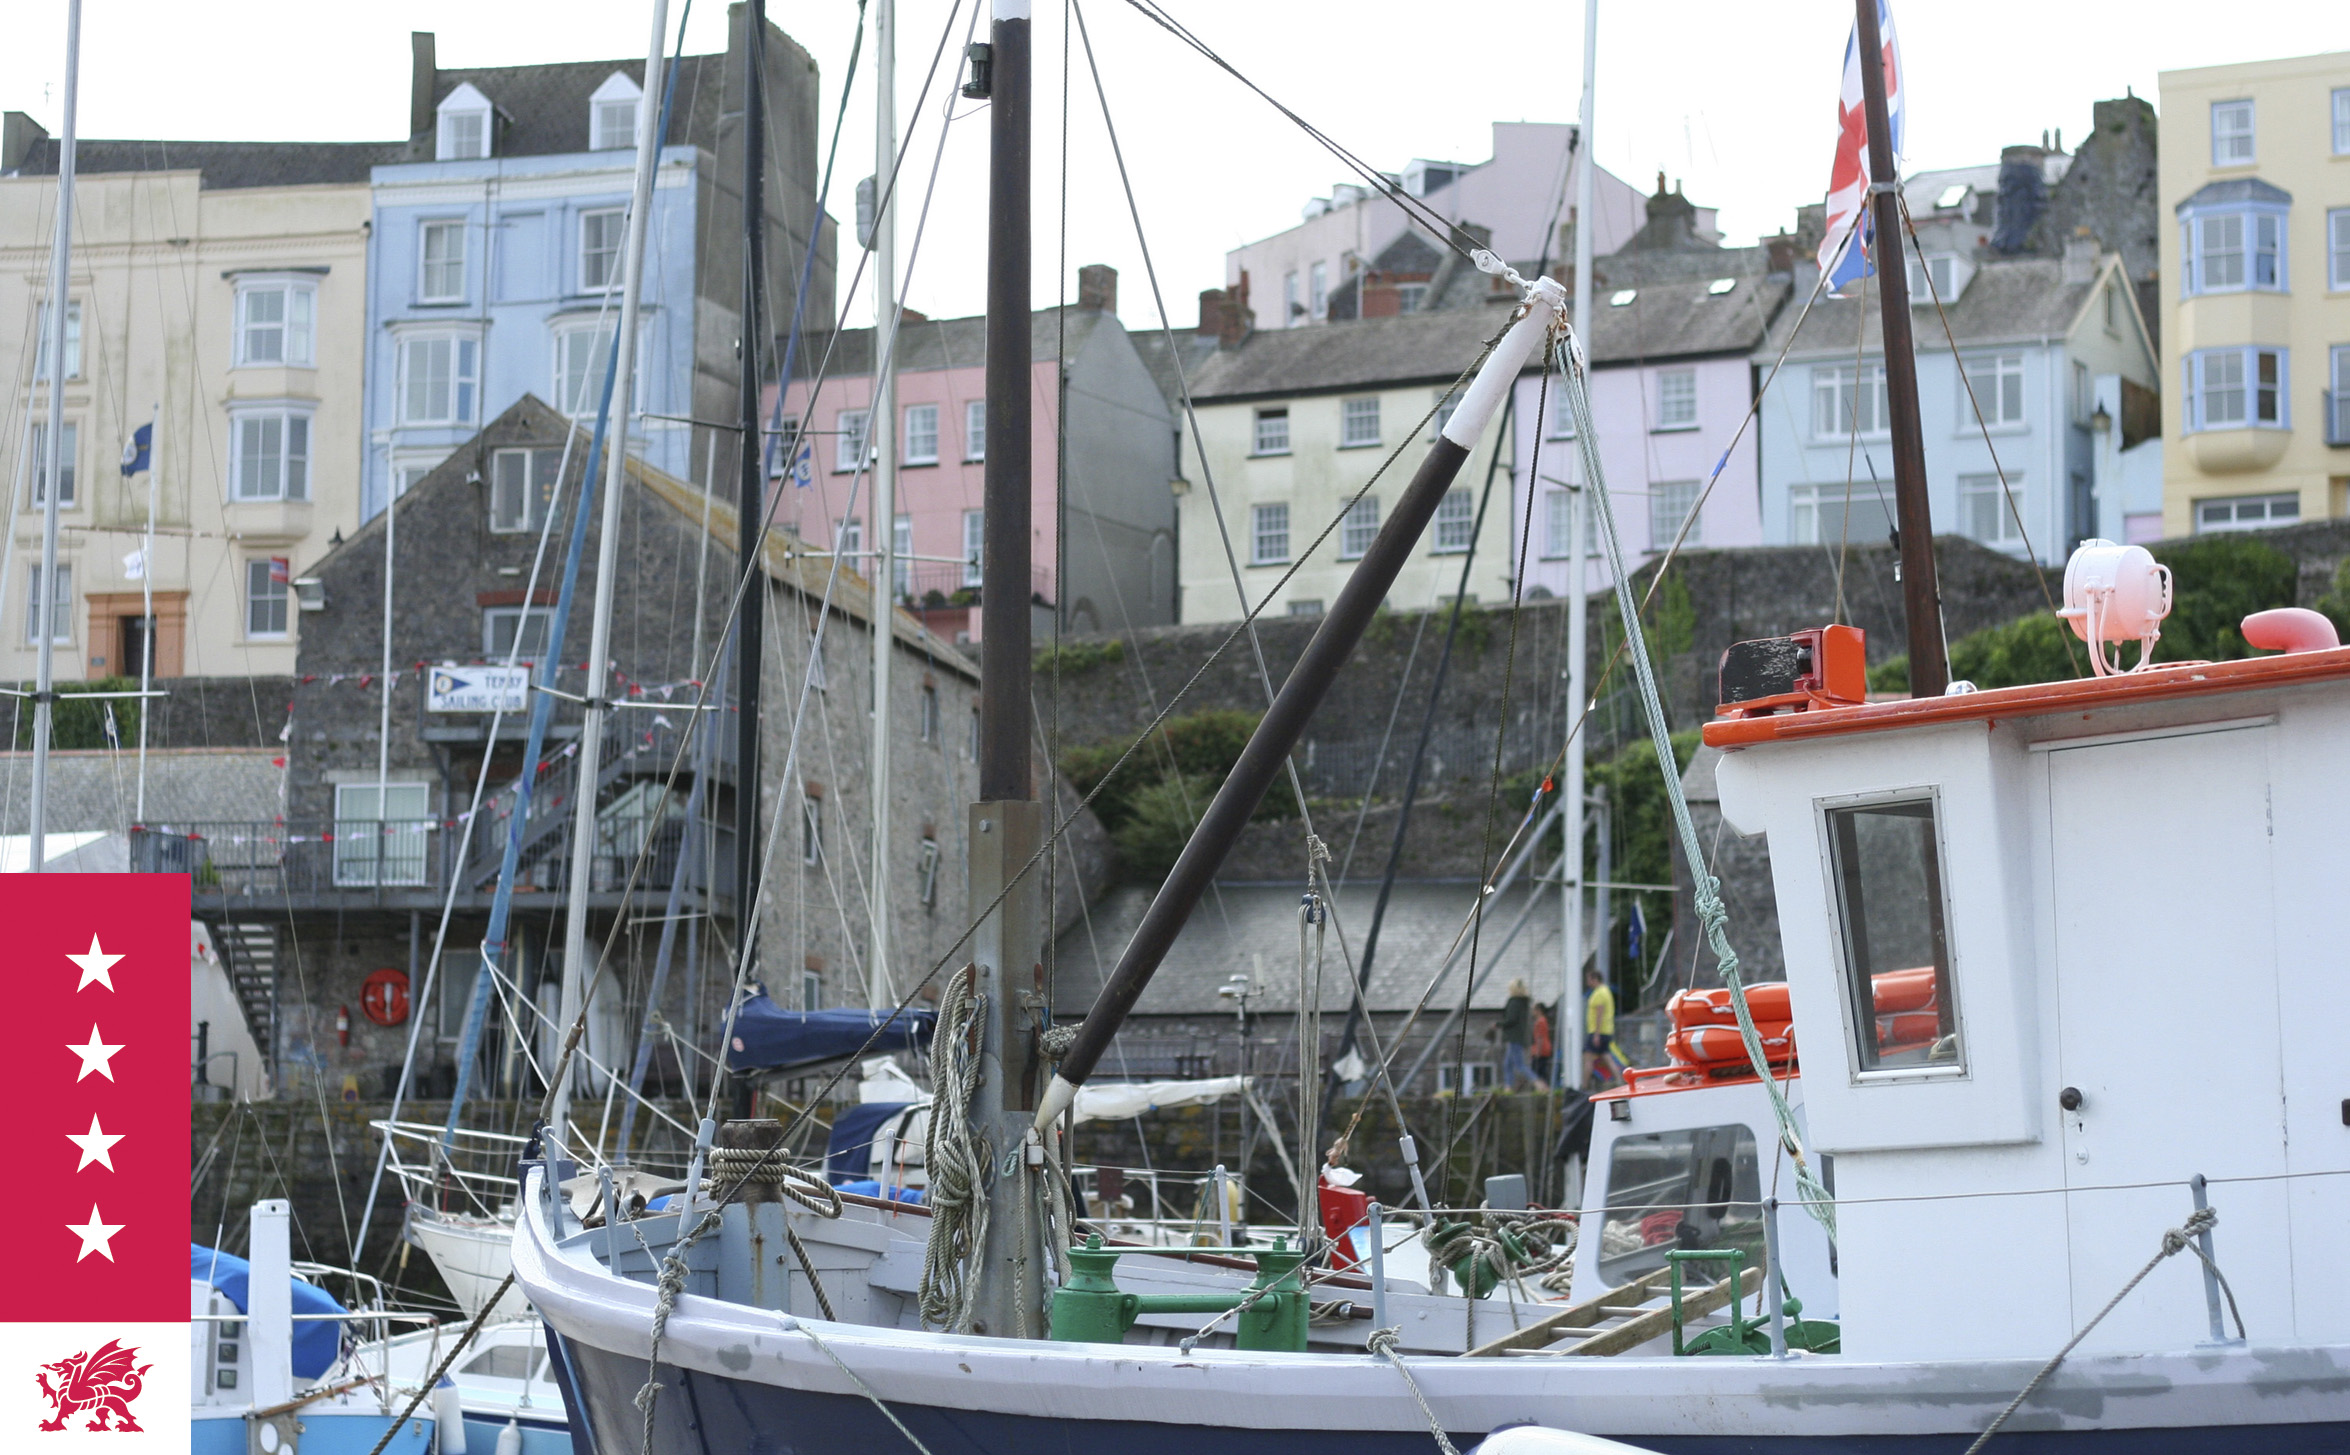 View of Tenby town from the harbour